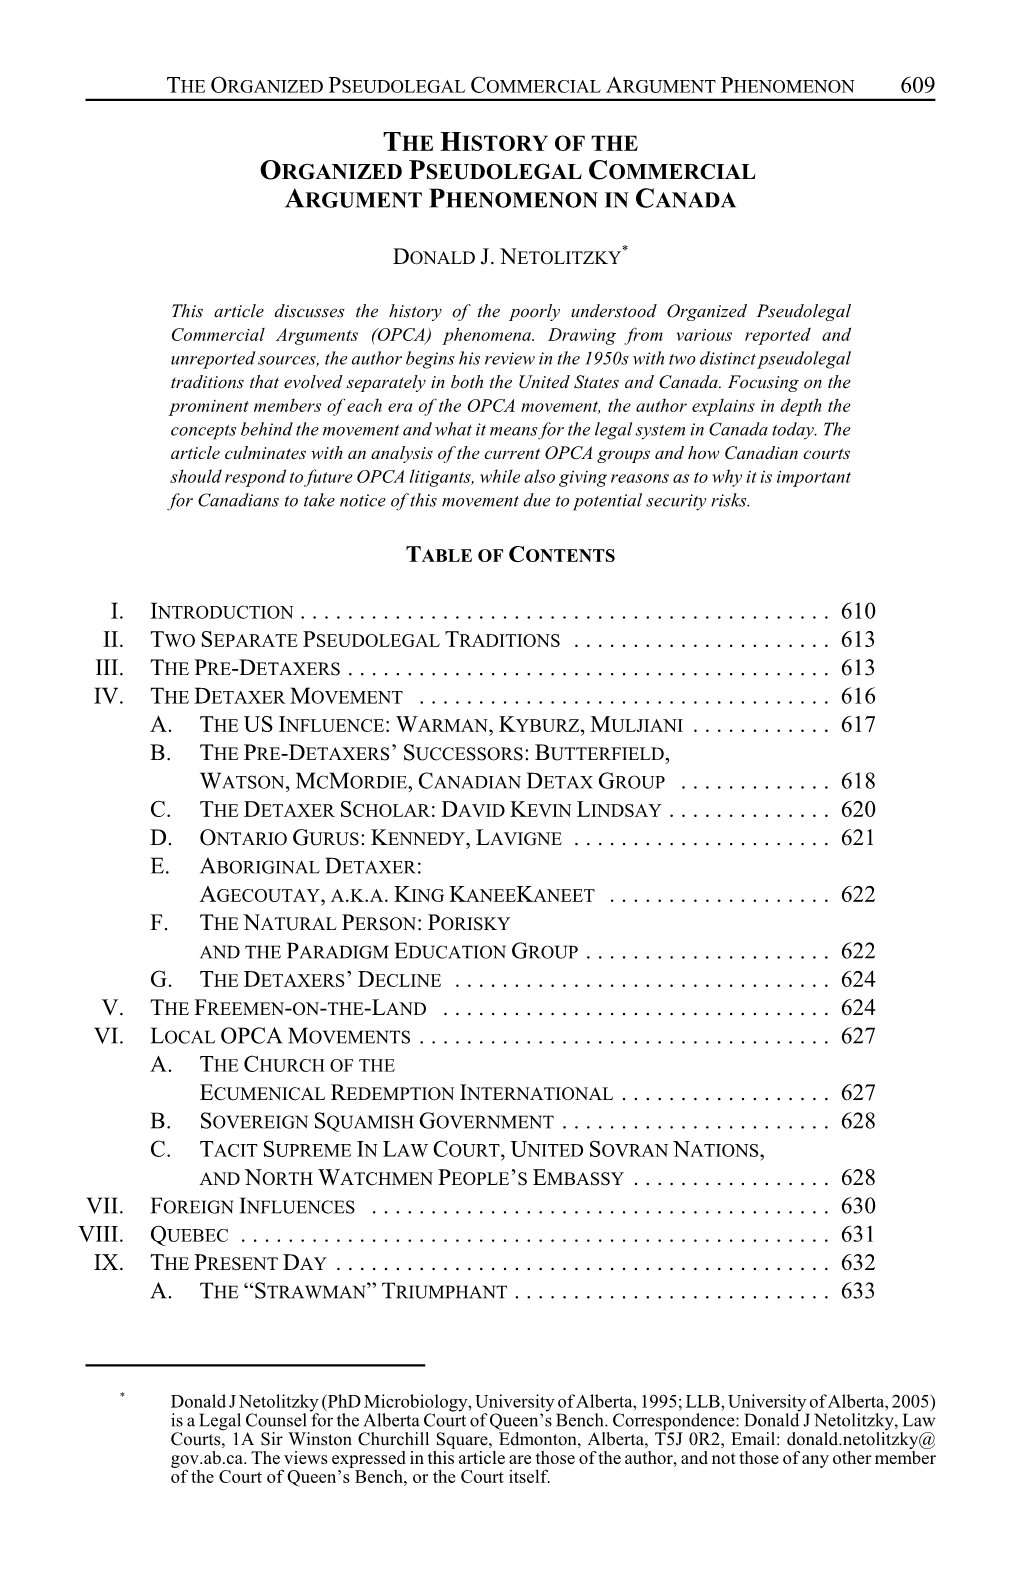 609 the History of the Organized Pseudolegal Commercial Argument Phenomenon in Canada I. Introduction